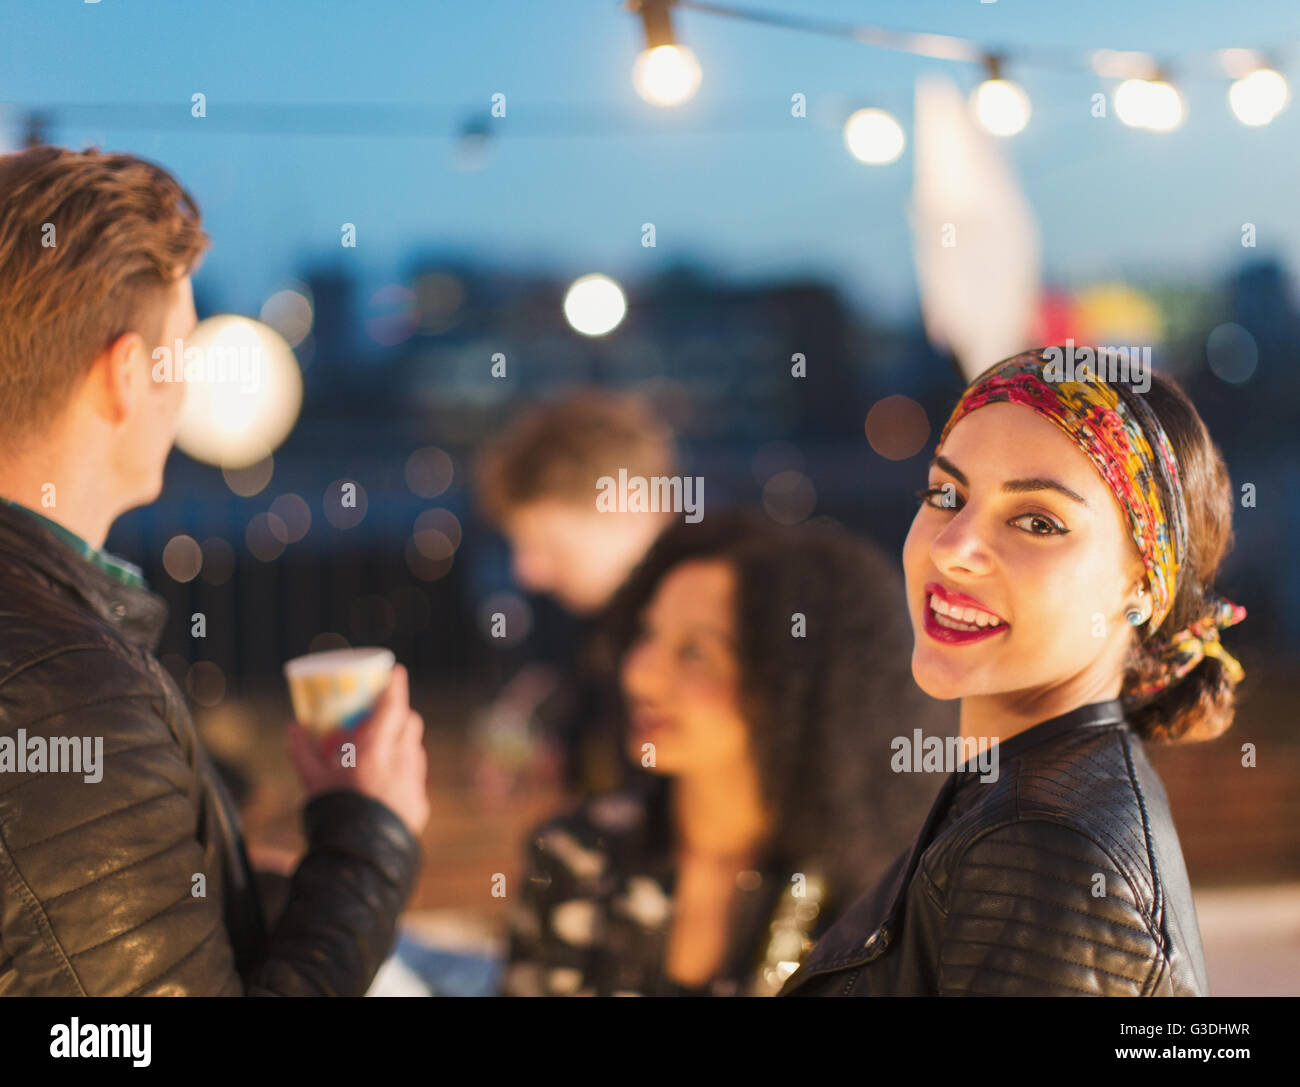 Portrait smiling young woman enjoying rooftop party at night Stock Photo